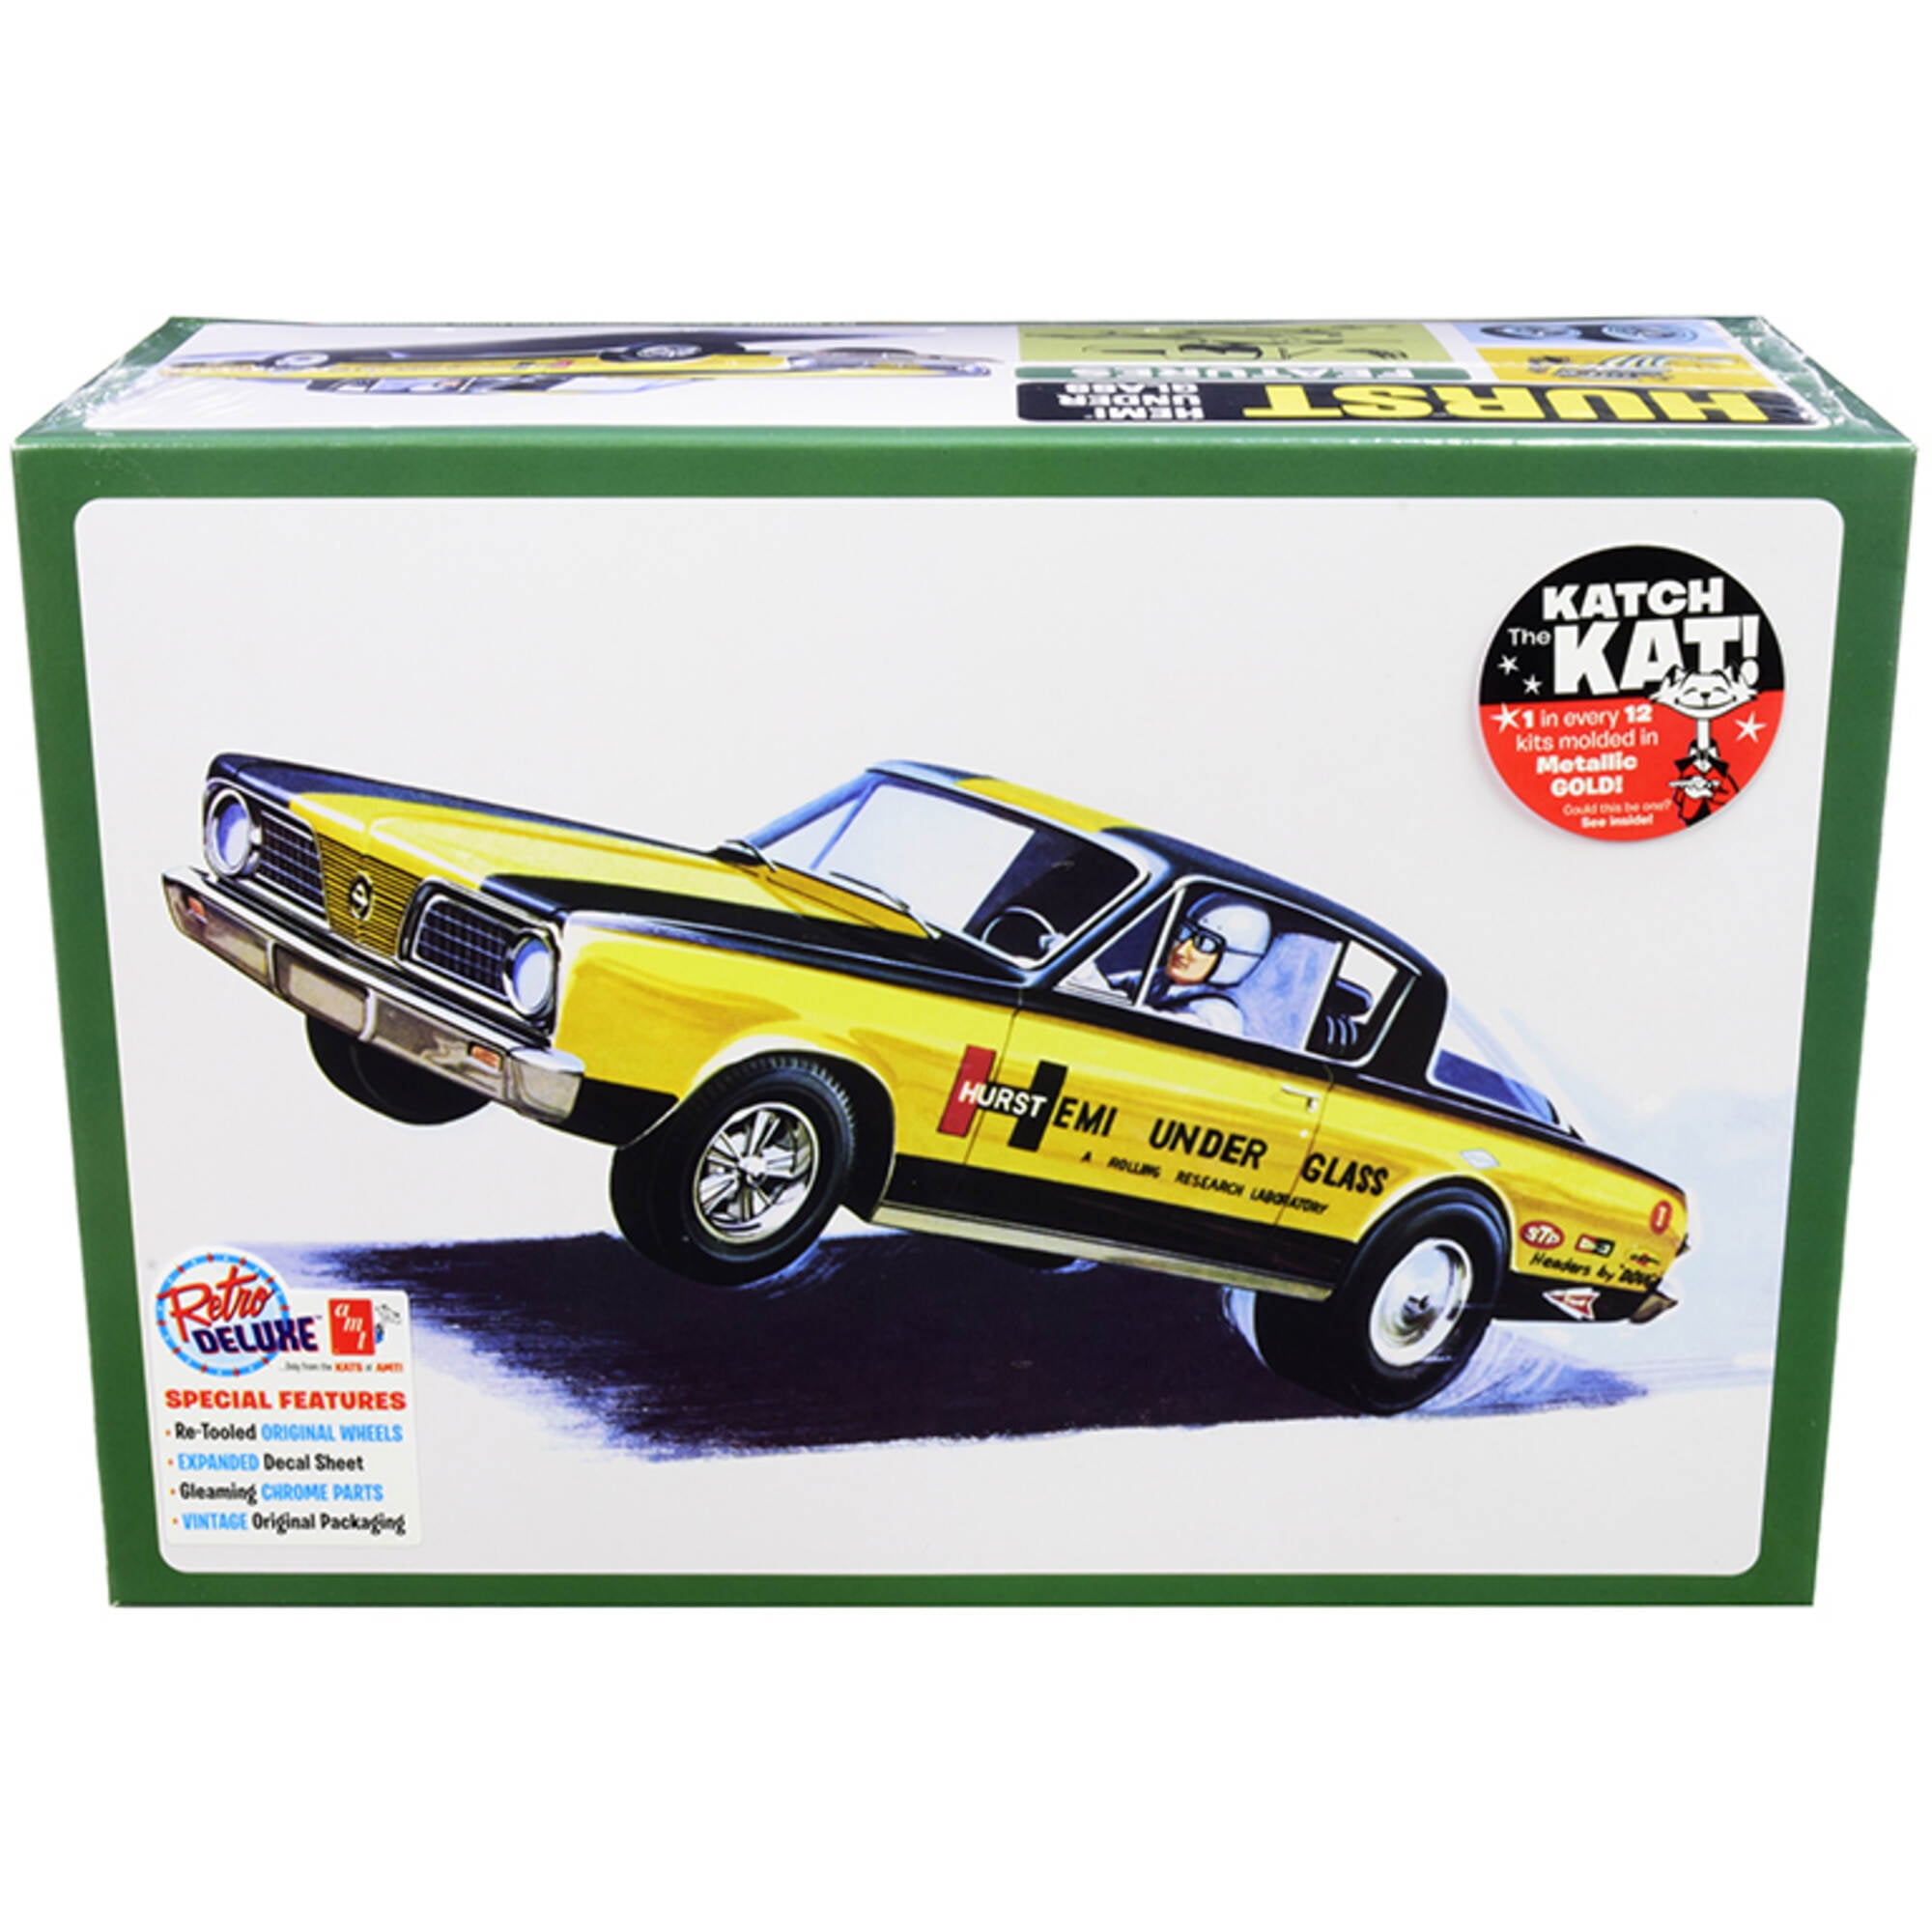 Picture of AMT AMT1153 Skill 2 Model Kit 1966 Plymouth Barracuda Funny Car Hemi Under Glass 1 by 25 Scale Model